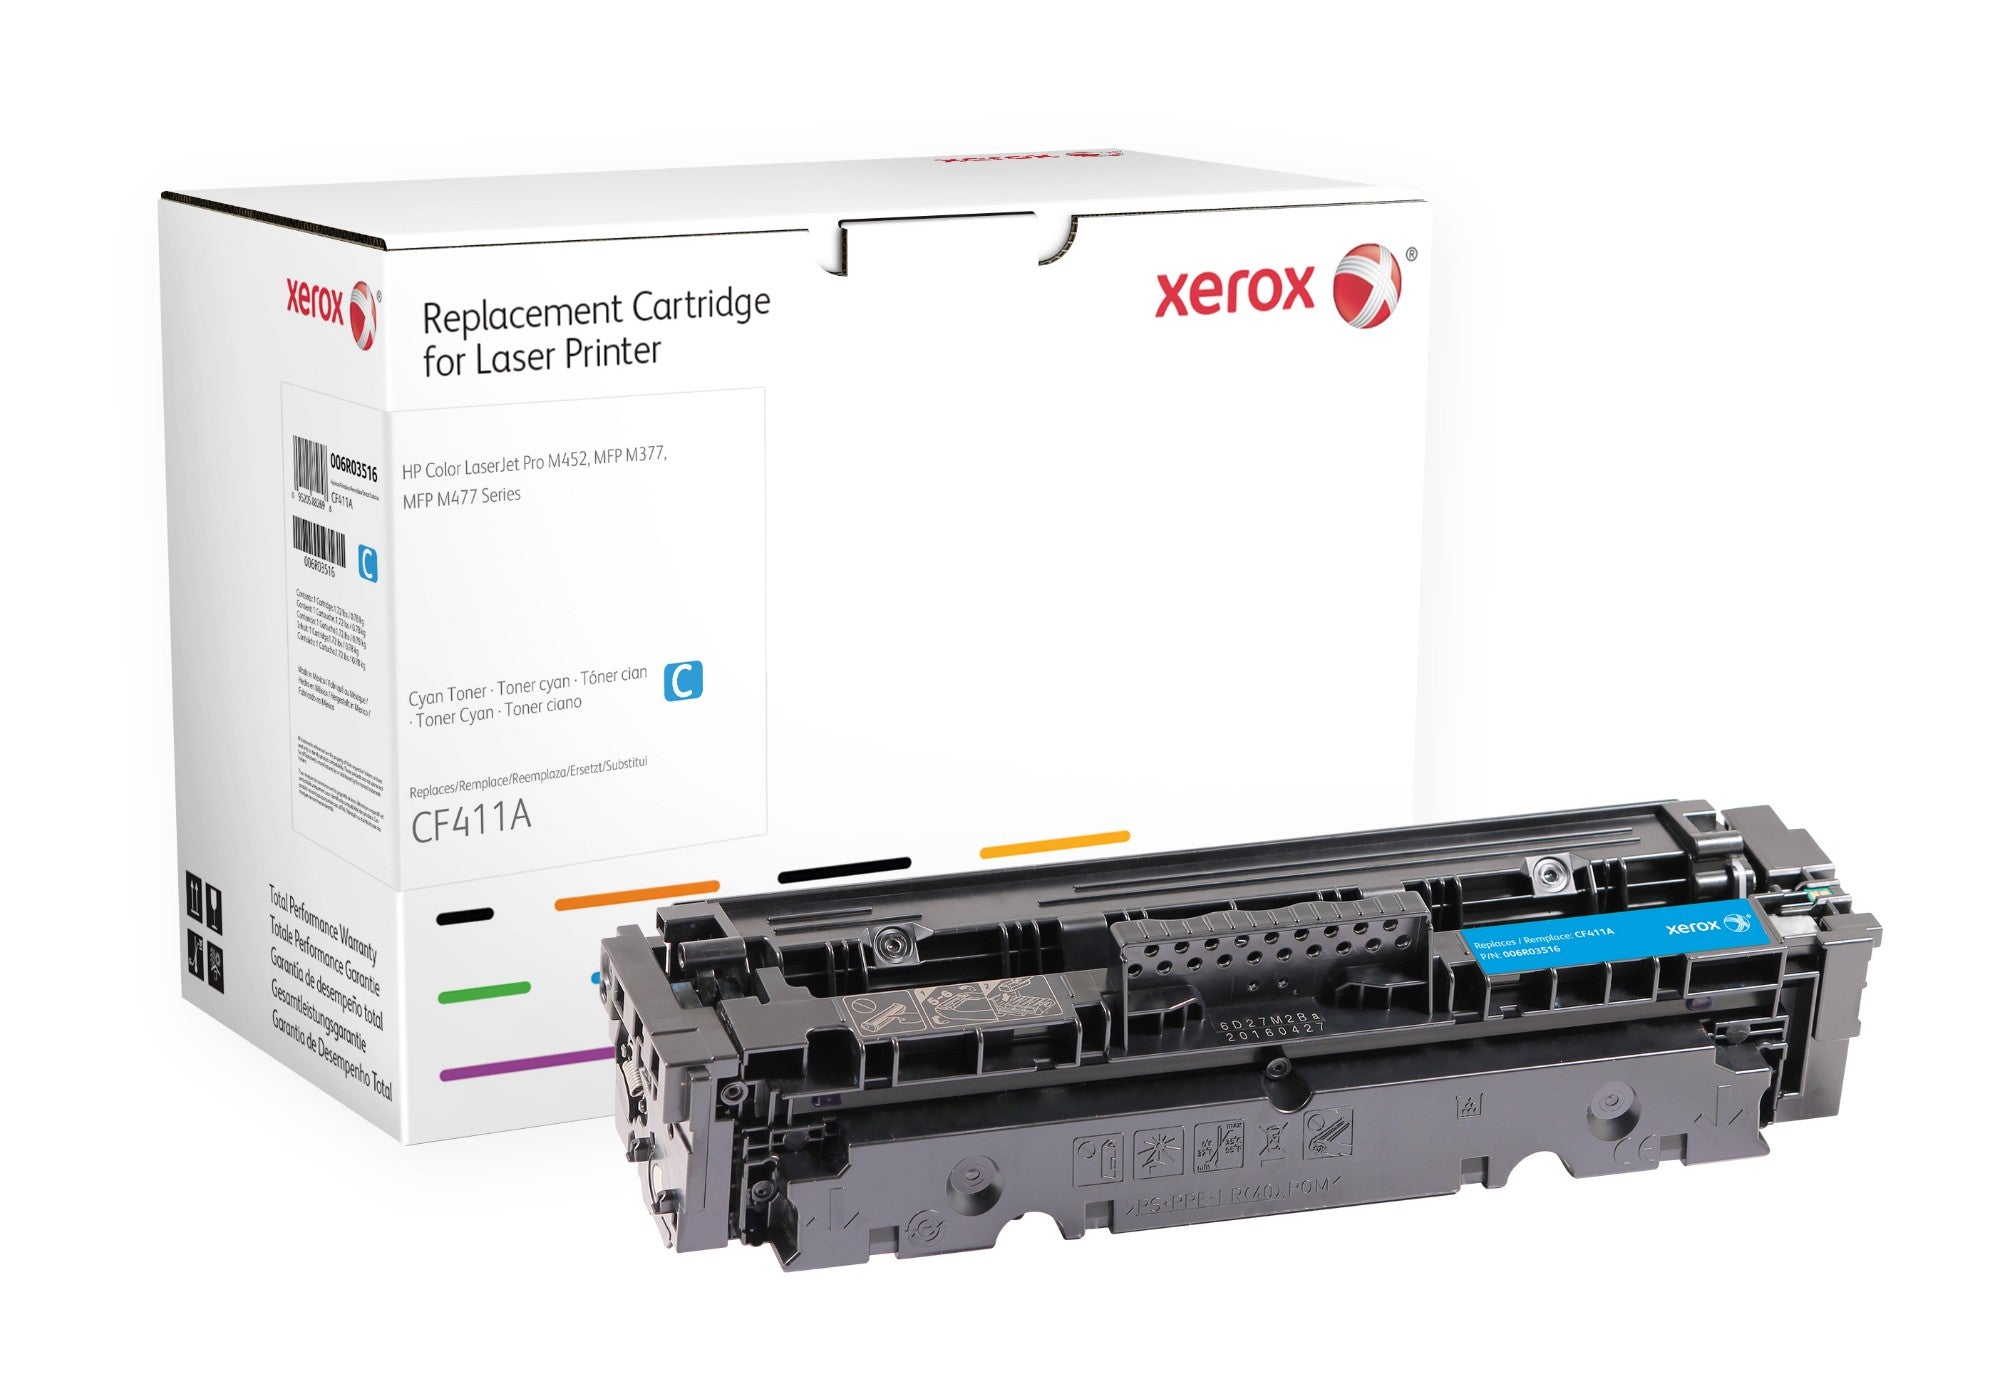 Xerox 006R03516 Toner cartridge cyan, 2.3K pages (replaces HP 410A/CF411A) for HP Pro M 452